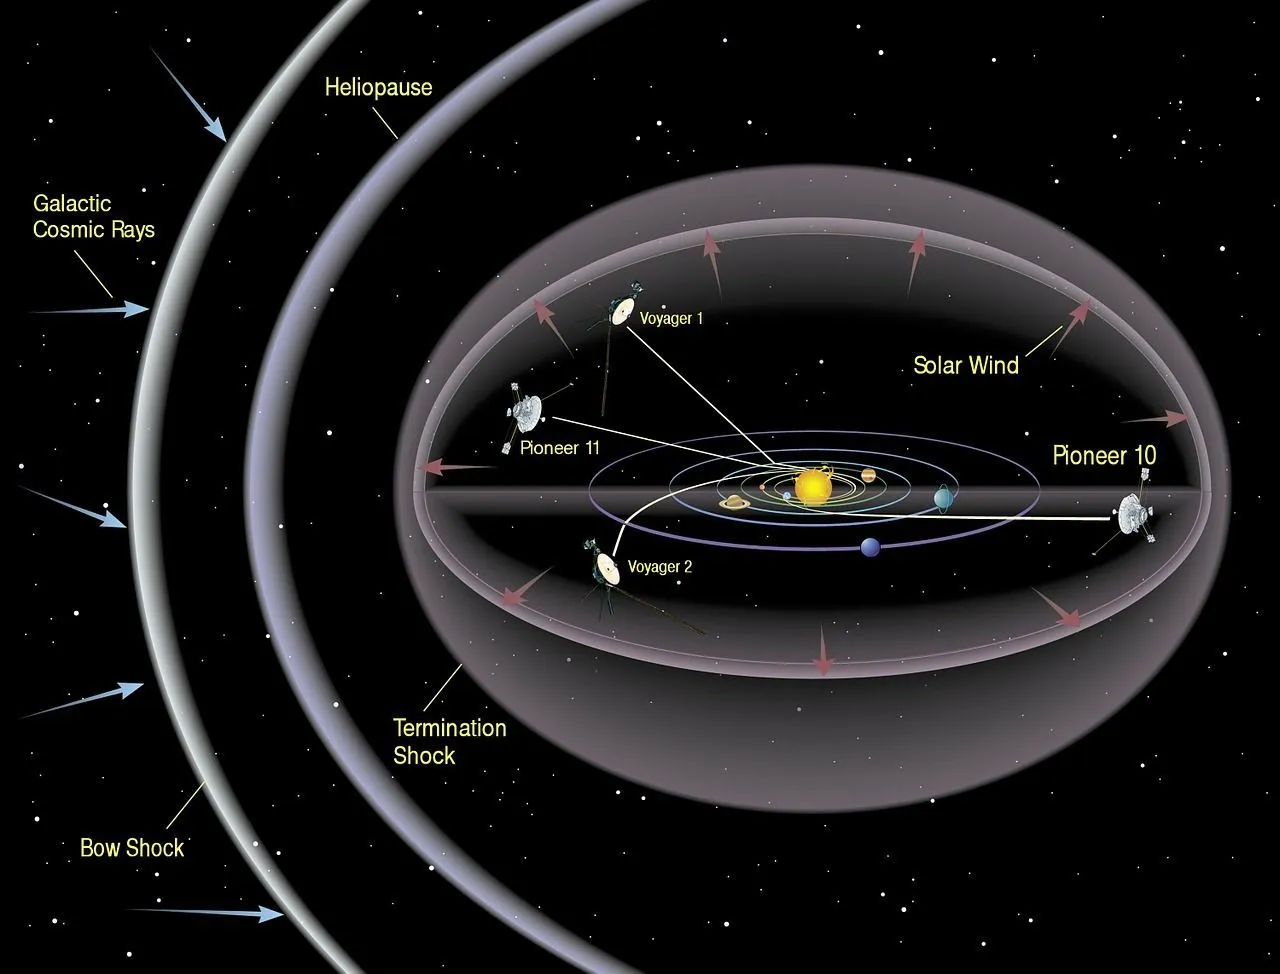 81 Voyager 1 Facts: Timeline, Discoveries, Launch And More | Kidadl